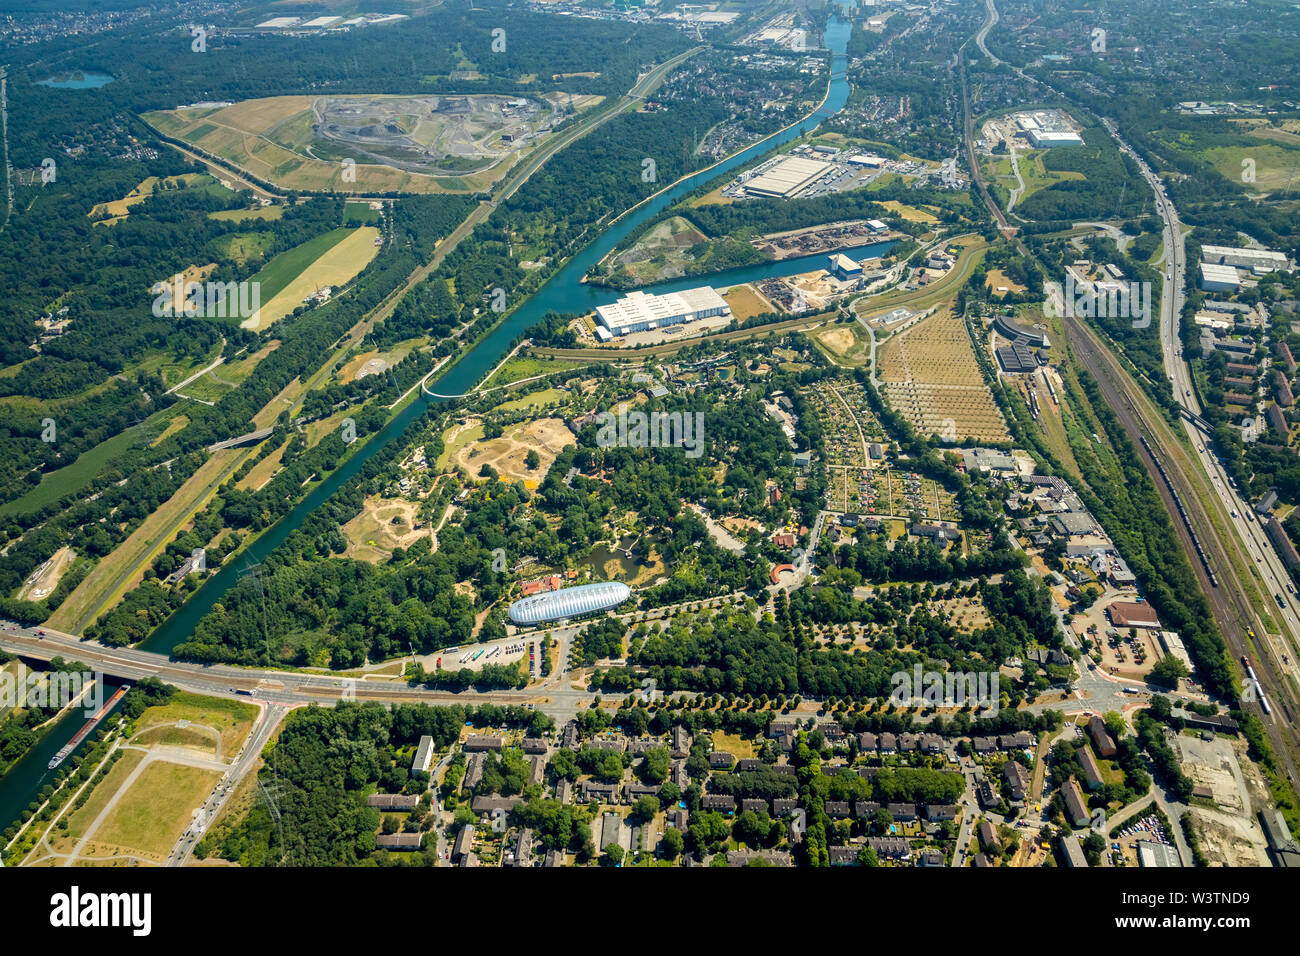 , Aerial view of the Zoo Gelsenkirchen ZOOM Experience world with Africa, Asia and Alaska areas, playgrounds, boat tours and restaurants in Gelsenkirc Stock Photo